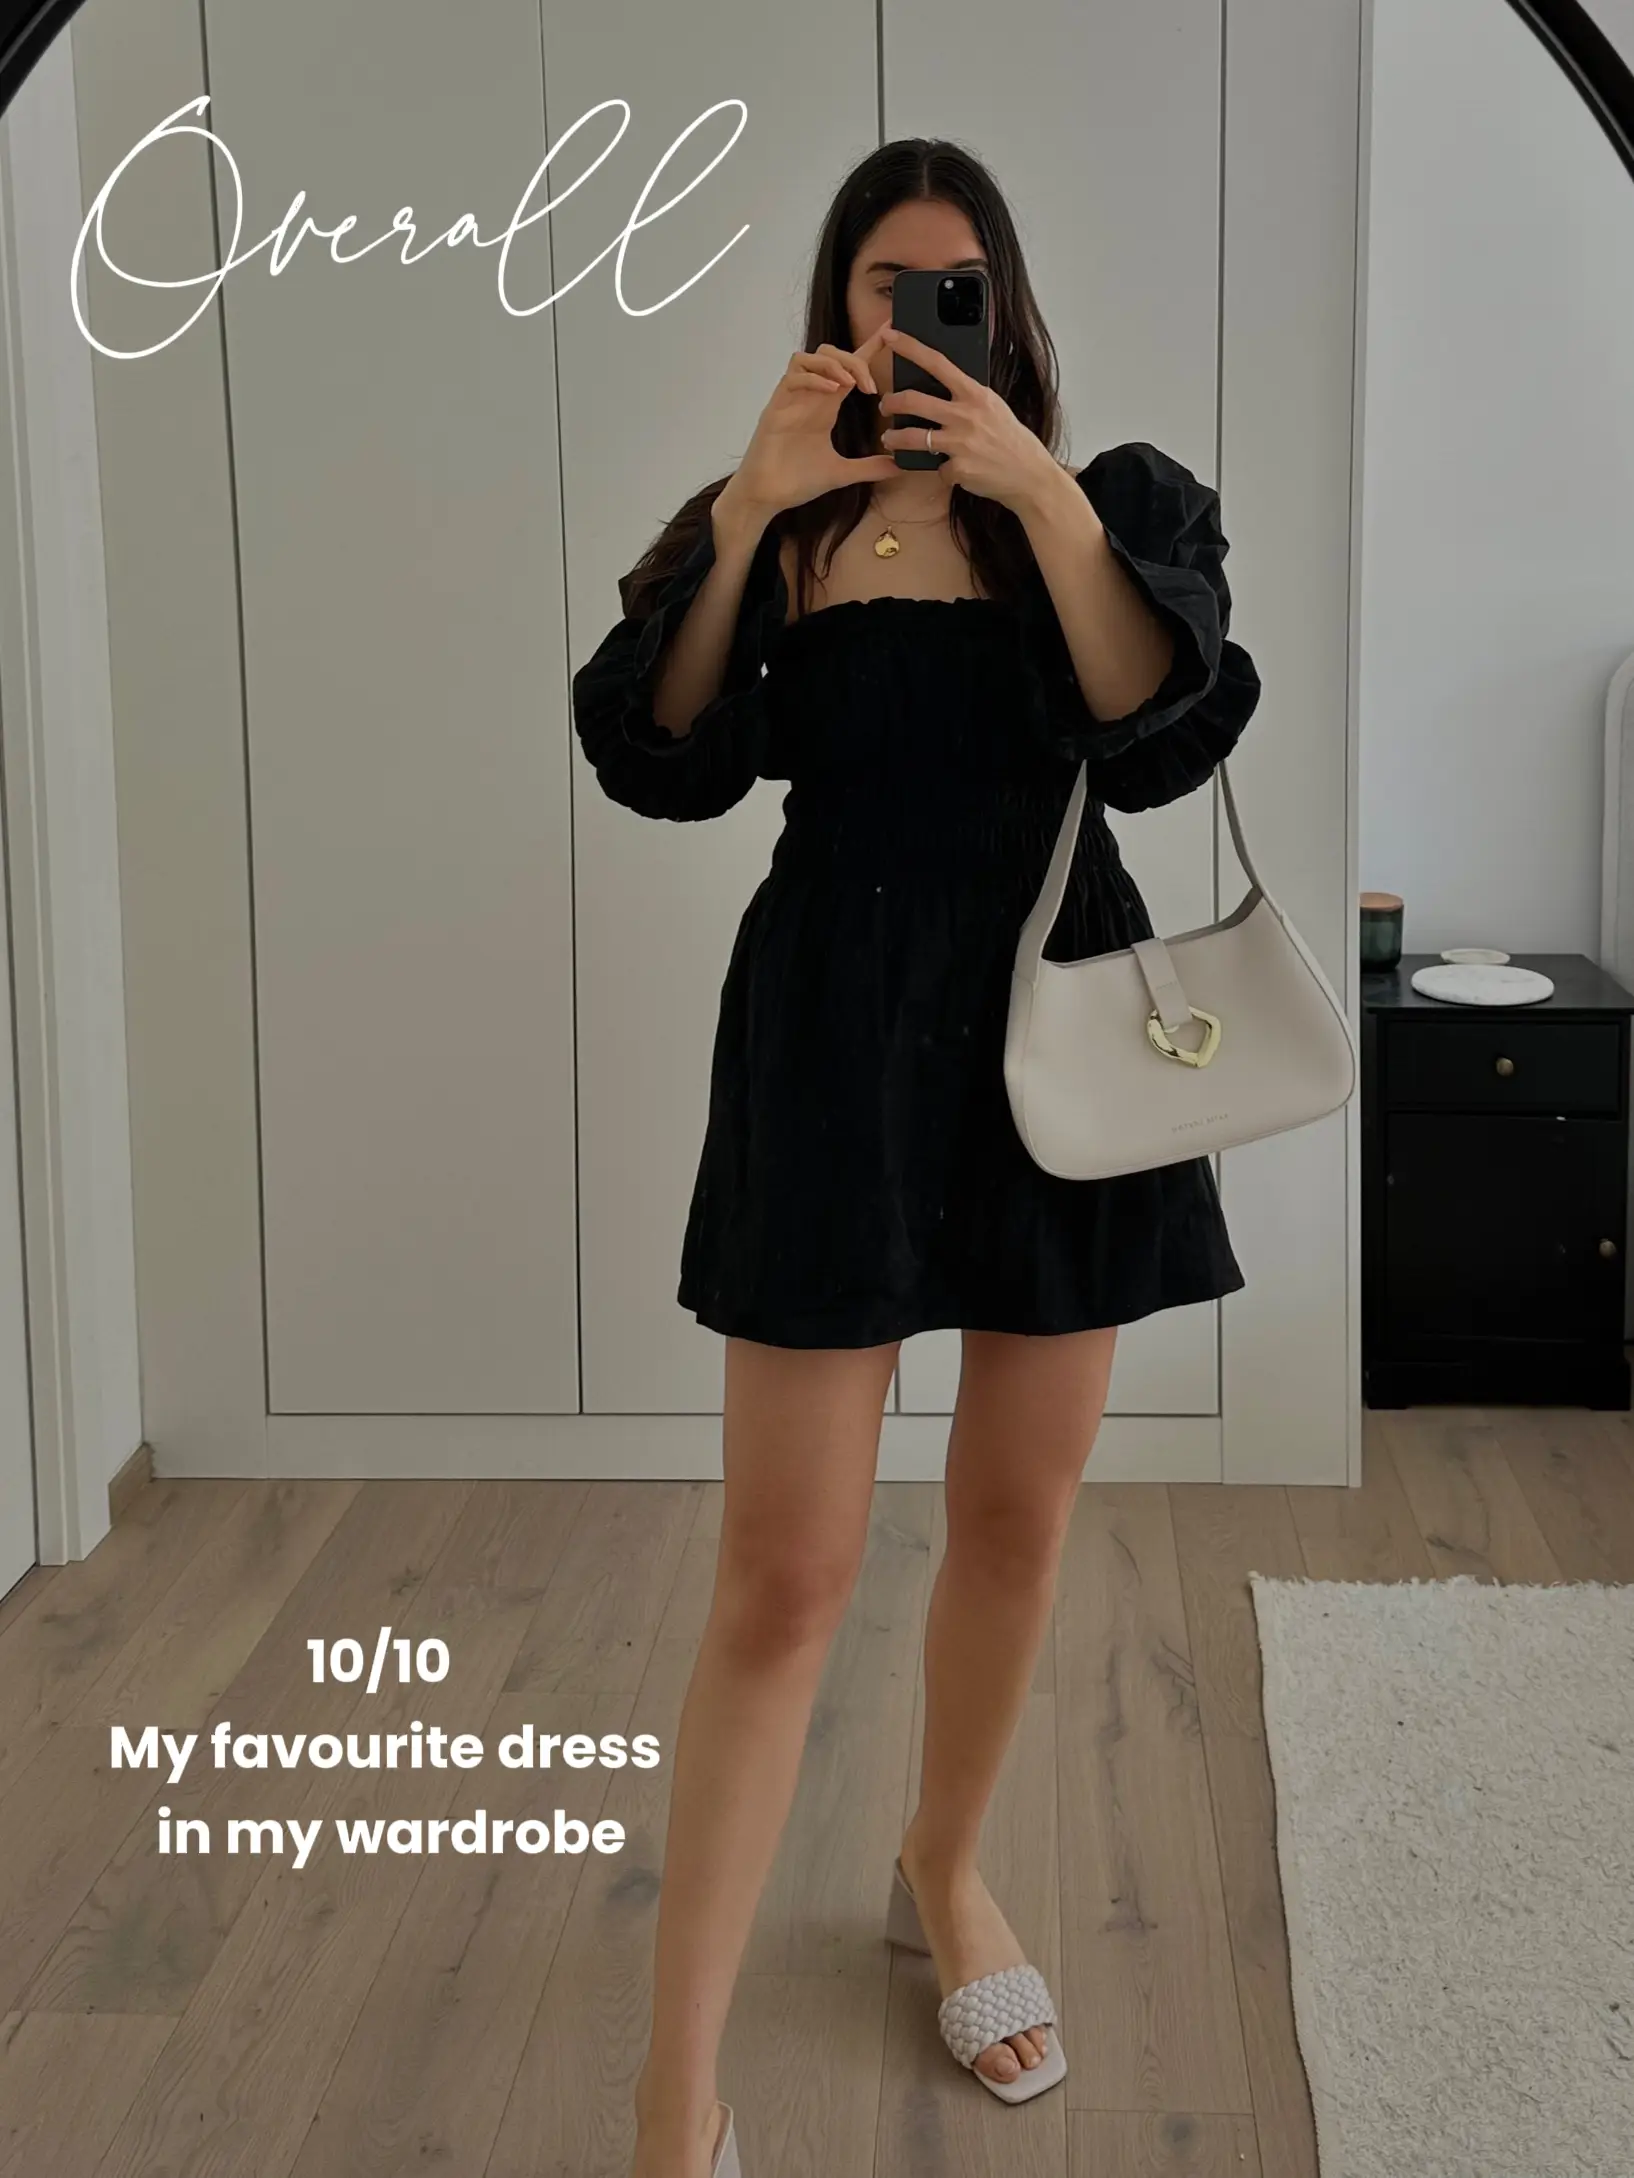 In The Style – Lorna Luxe Dress Review